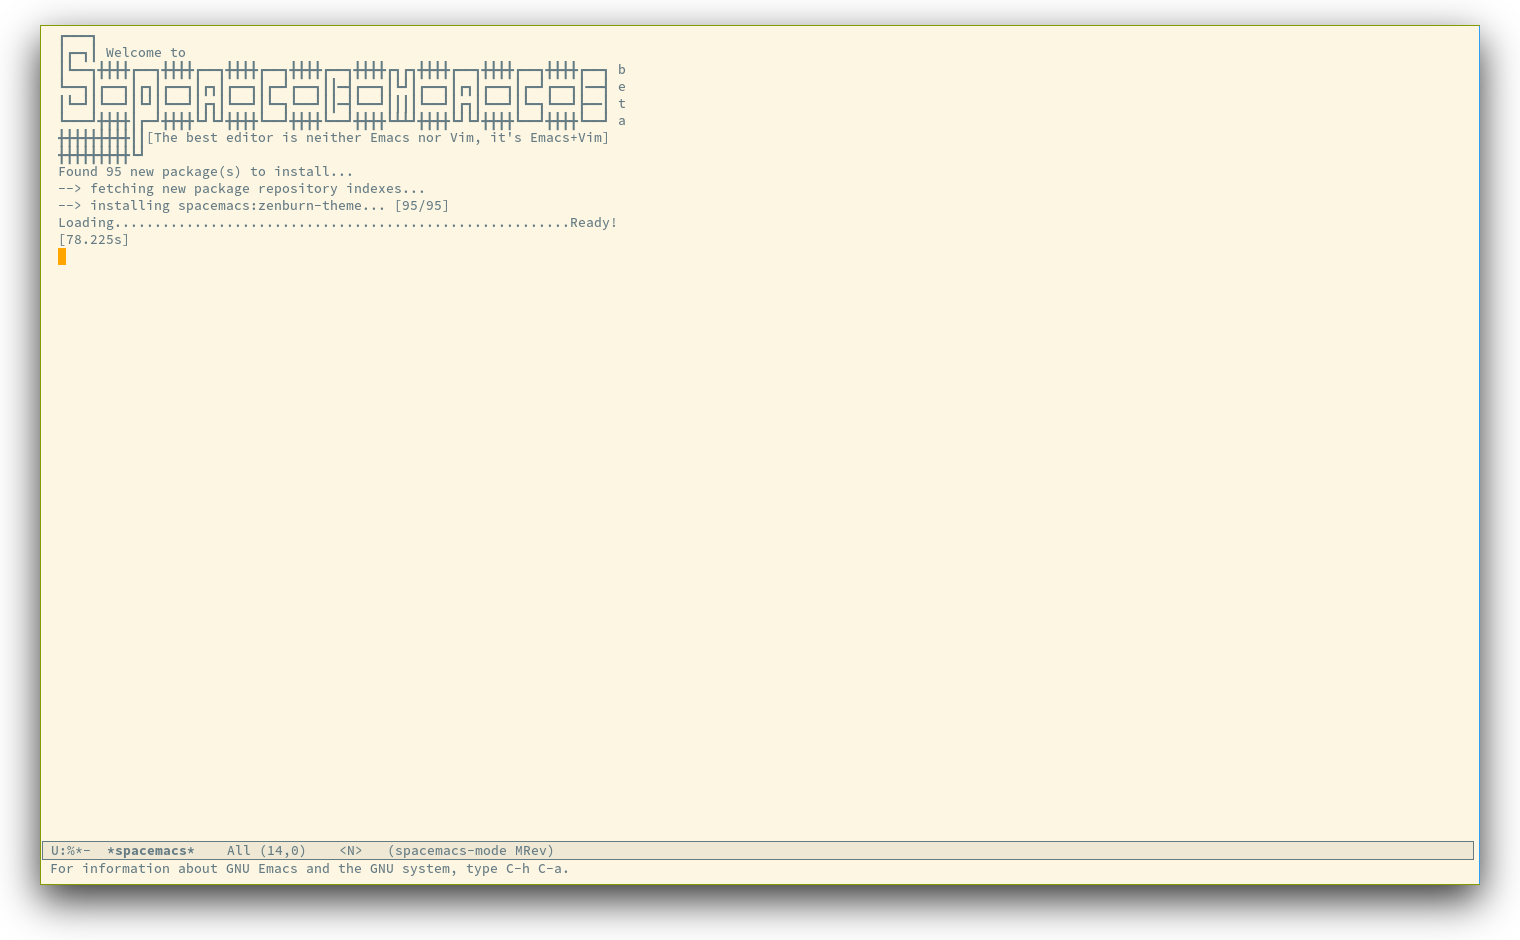 /TakeV/spacemacs/media/commit/4a19bd9d33ca0d184b8c6c0dd86a2e4c6f232325/doc/img/spacemacs-startup.png